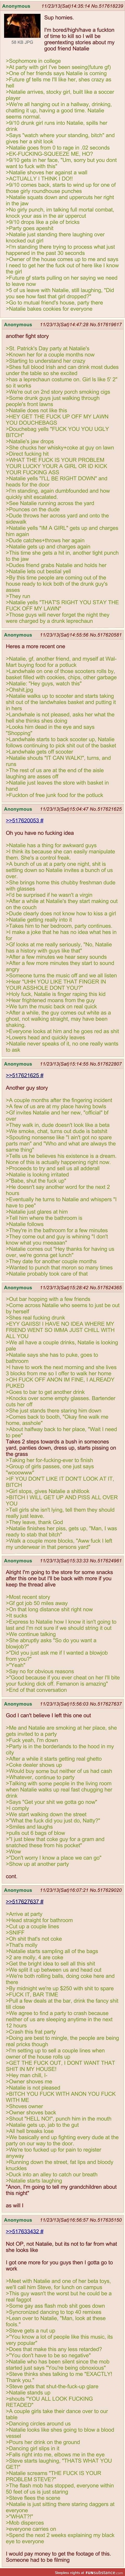 The story of natalie